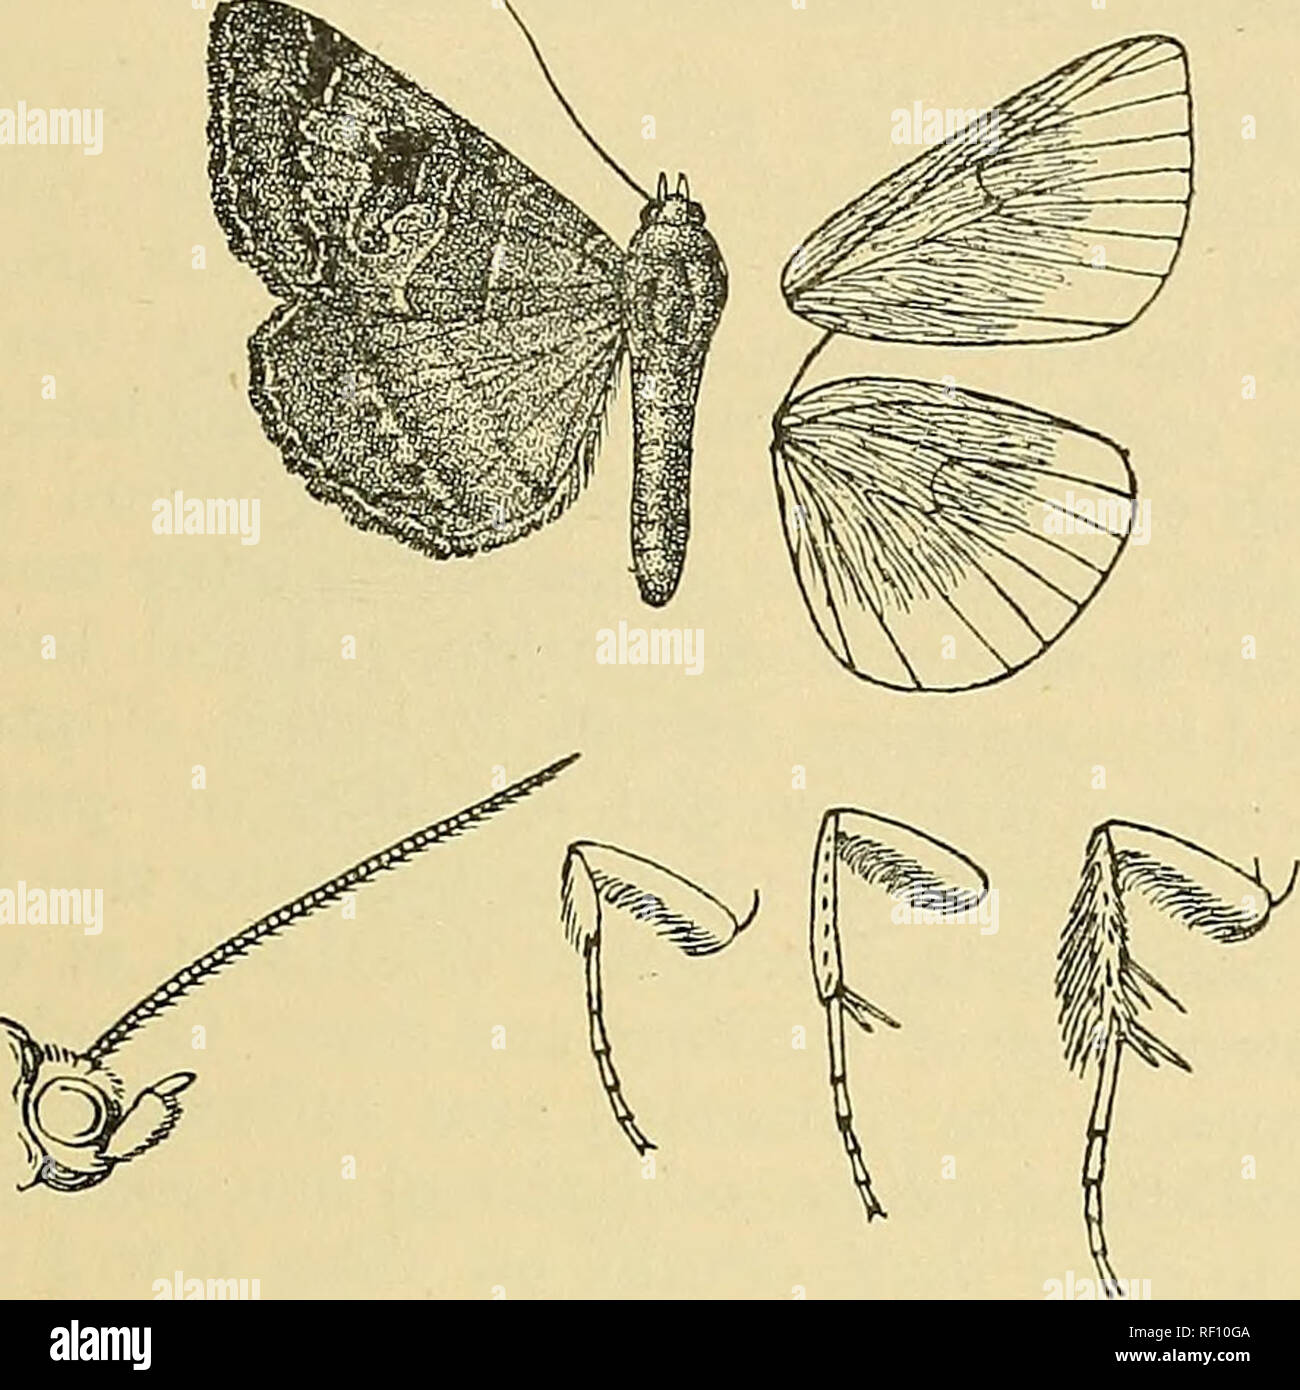 . Catalogue of the Lepidoptera Phalænæ in the British museum. Moths. Mocis. 97 whitish suffused with brown. Hind wing grey suffused with brown ; an indistinct dark postmedial line and double diffused sub- termmal line; cilia whitish suffused with brown; the underside with the basal half tinged with rufous, the terminal half grey tinged and irrorated with brown.. Fig. 26.—Mods mutliaria, S- t- $ . Fore wing without the antemedial black point above inner margin, a sinuous medial line, the reniform wholly defined by brown and without the bifid black mark beyond it, a prominent dark shade before t Stock Photo